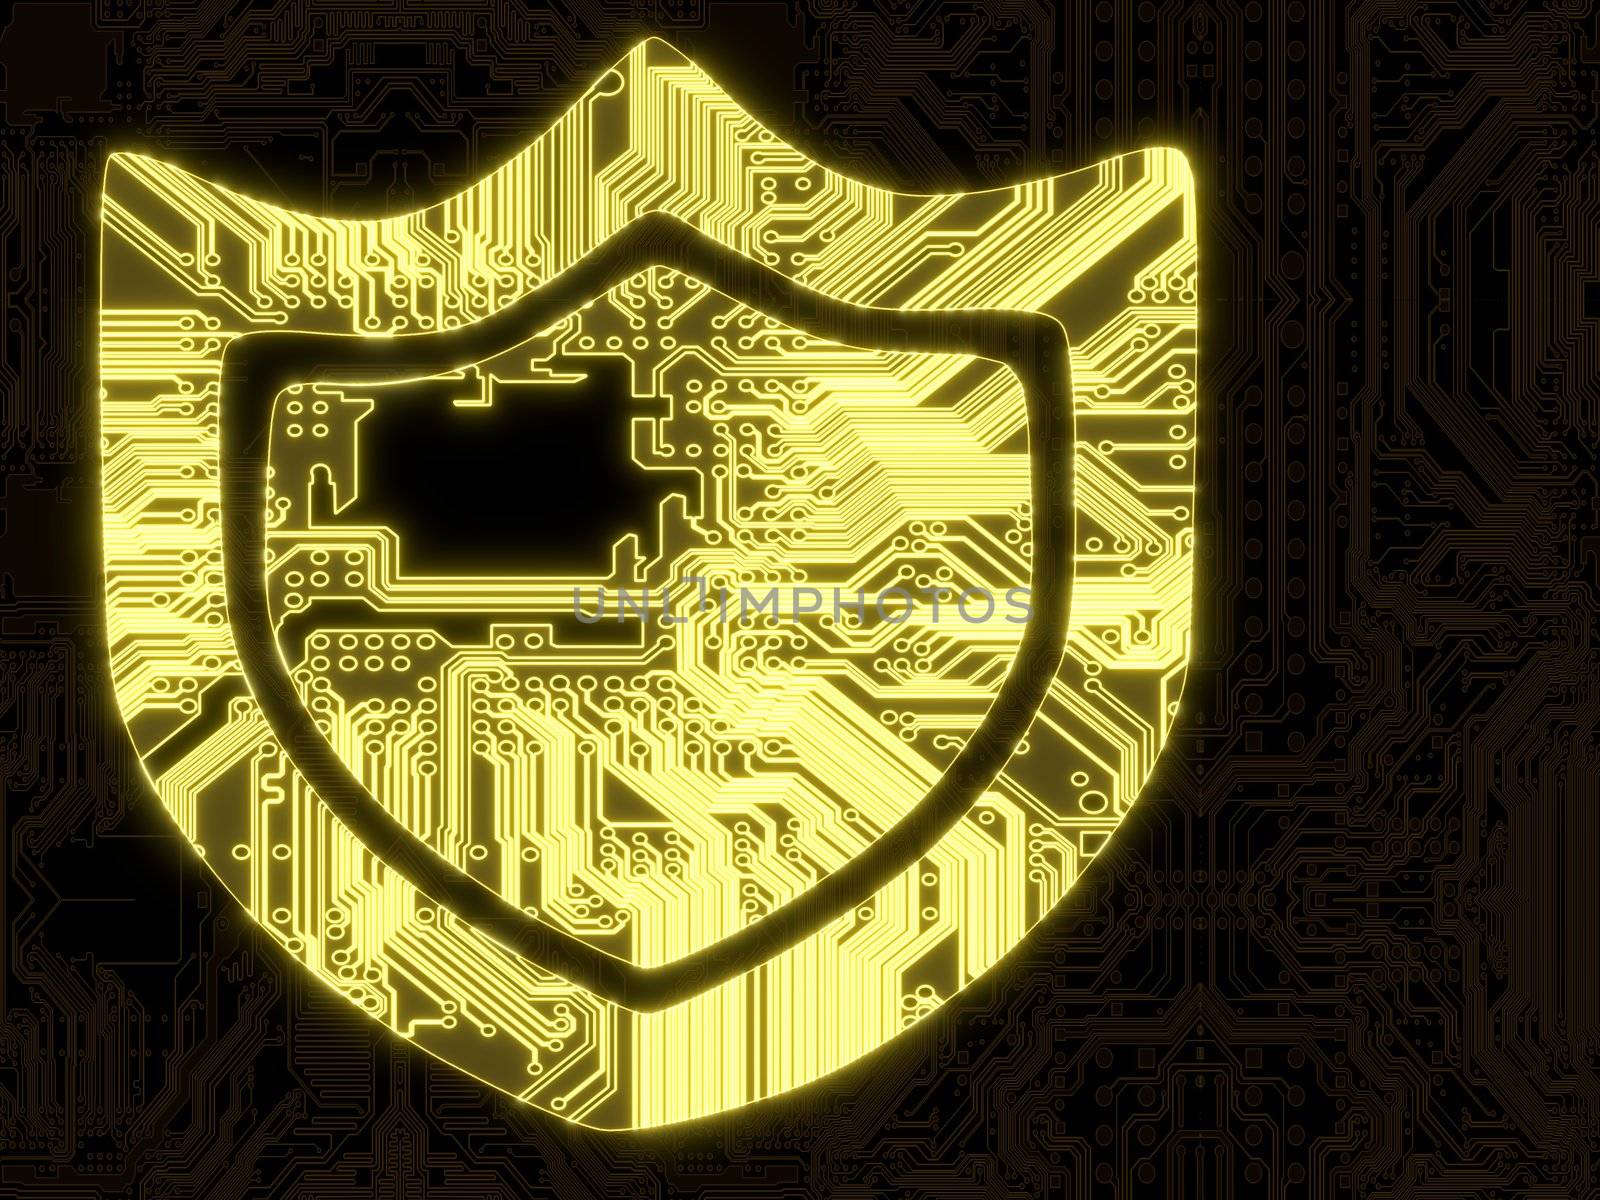 3D Graphic flare glowing protection symbol on a computer chip